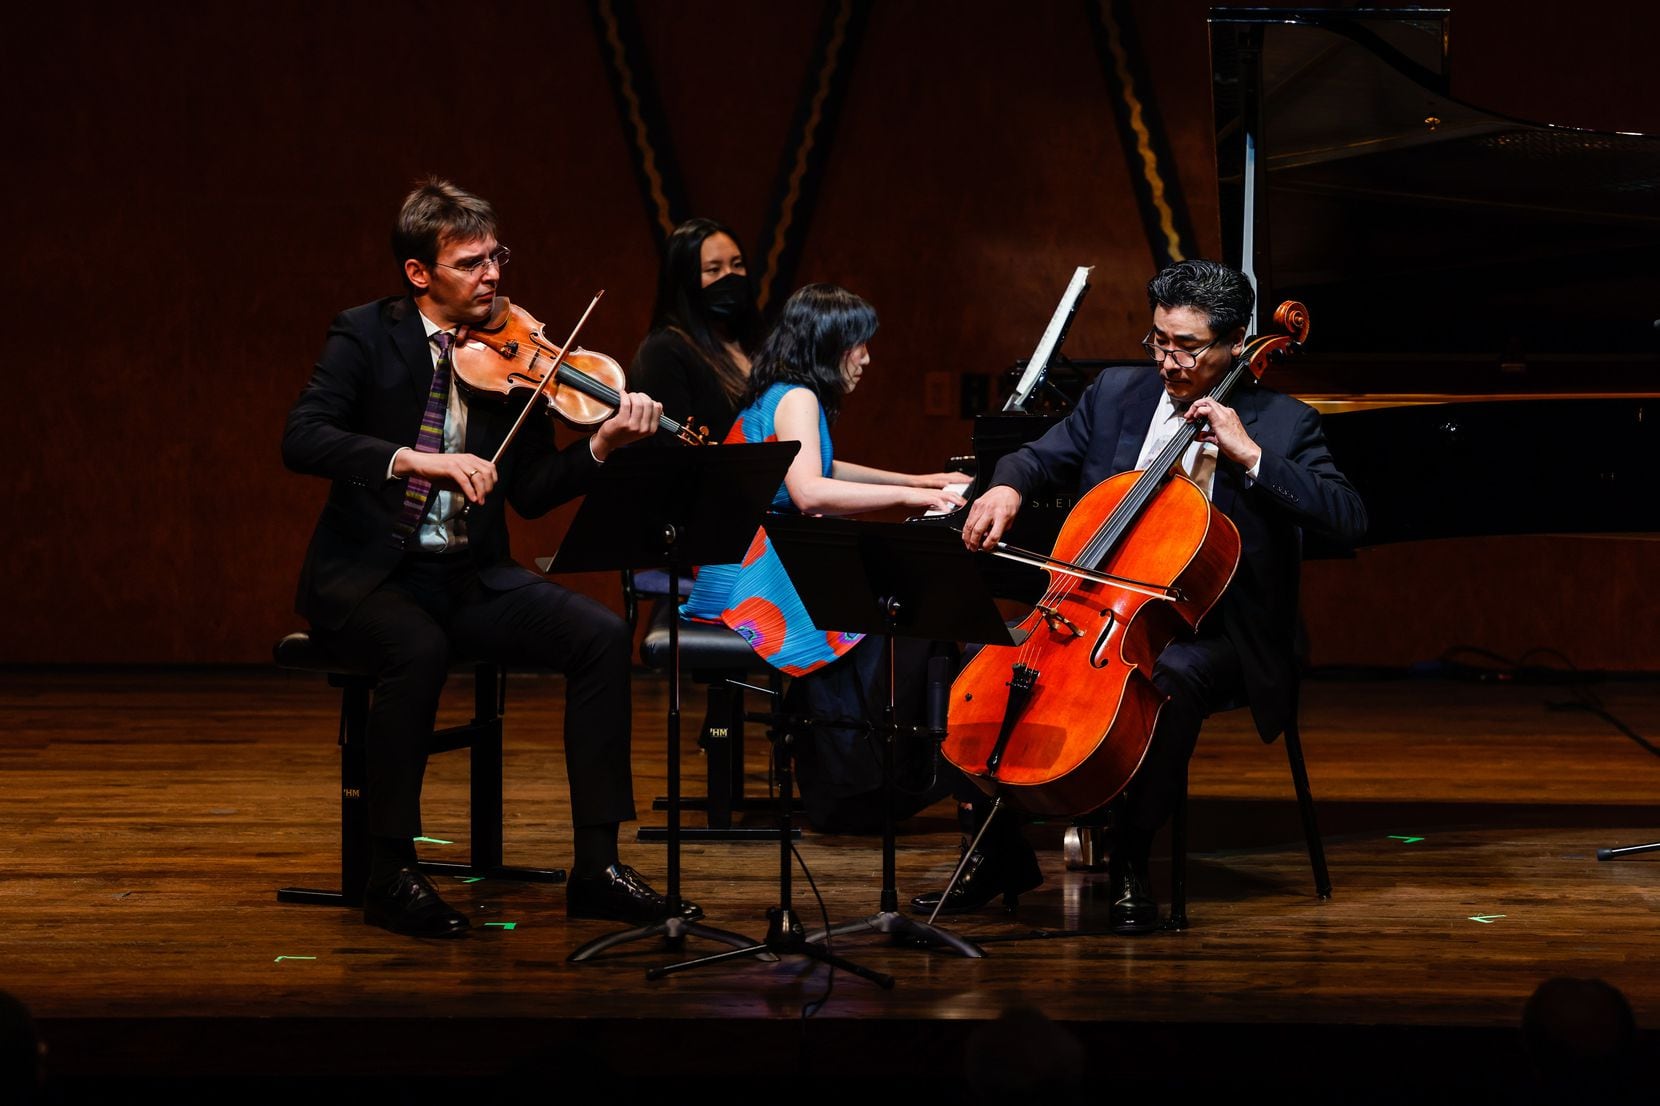 A substantive, difficult Mimir chamber music live performance